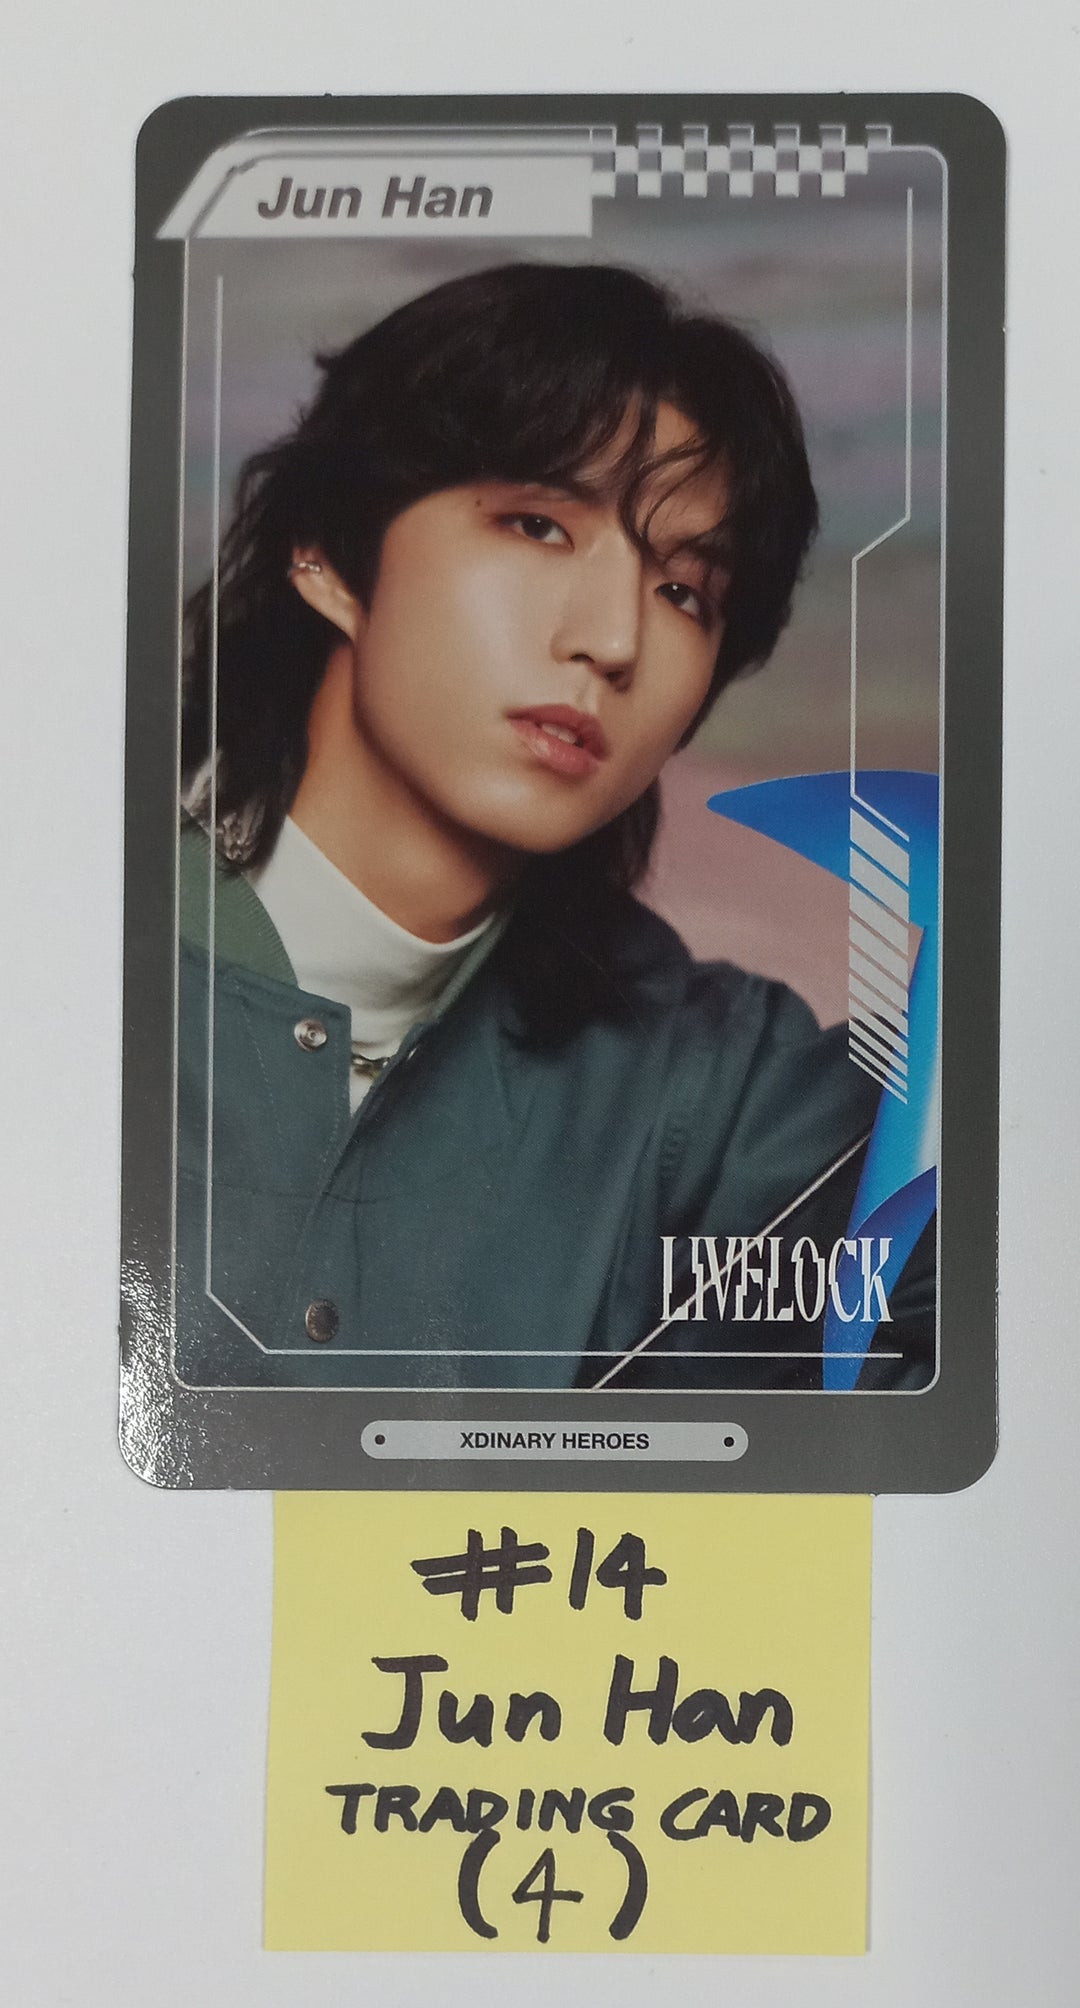 Xdinary Heroes "Livelock" - Official Photocard [23.10.12]